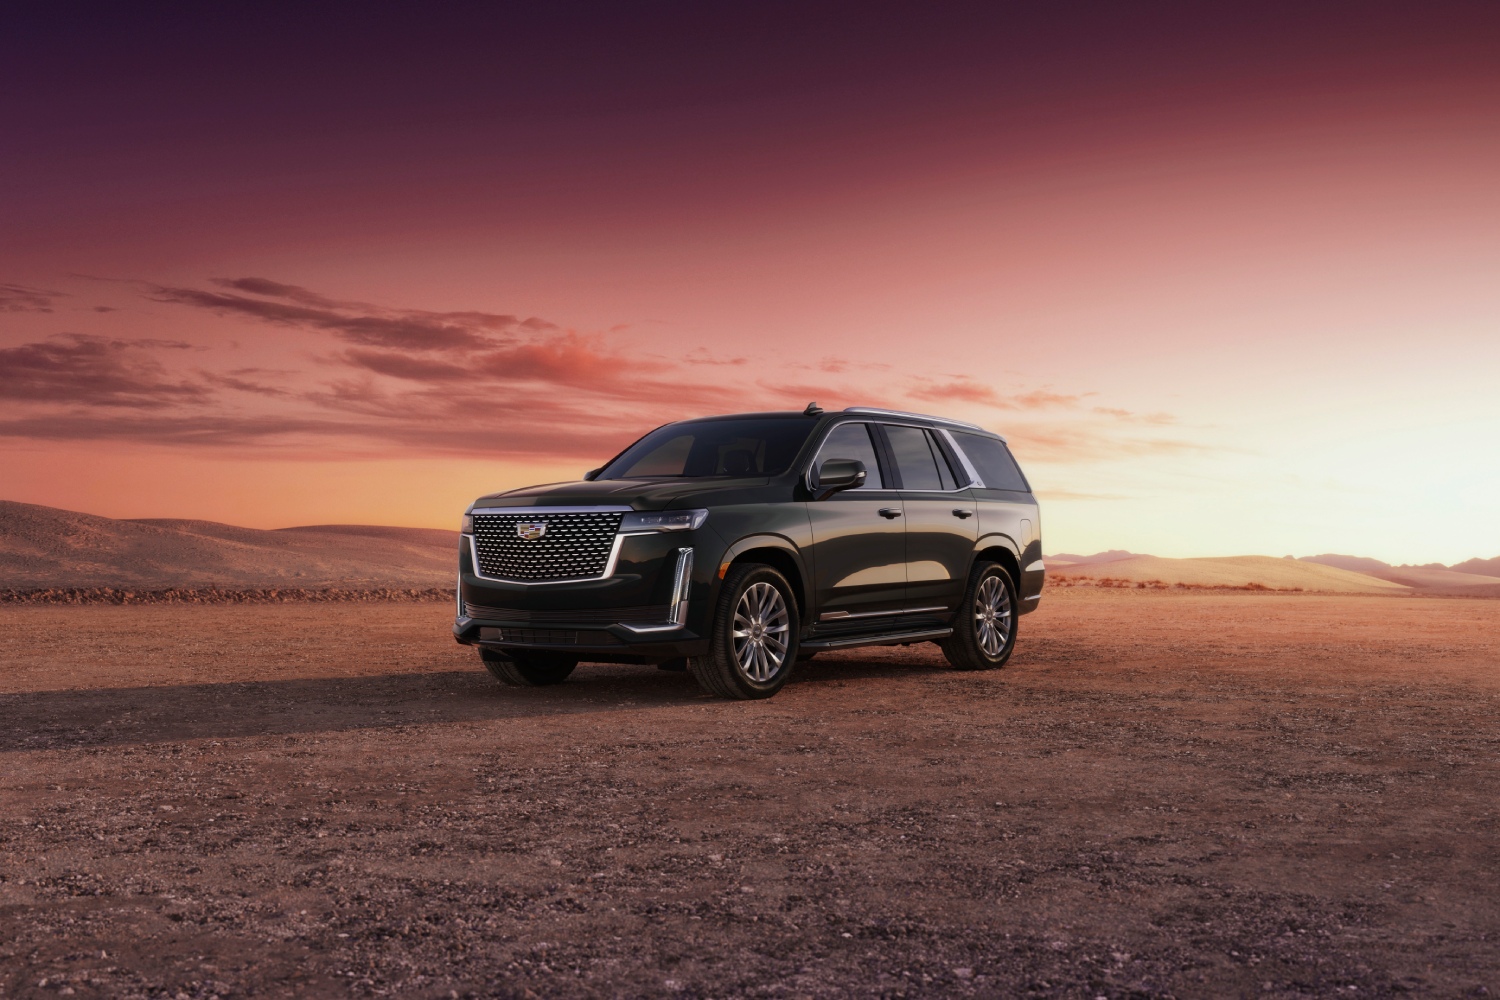 This Cadillac Escalade is one of the best luxury SUVs with room for seven